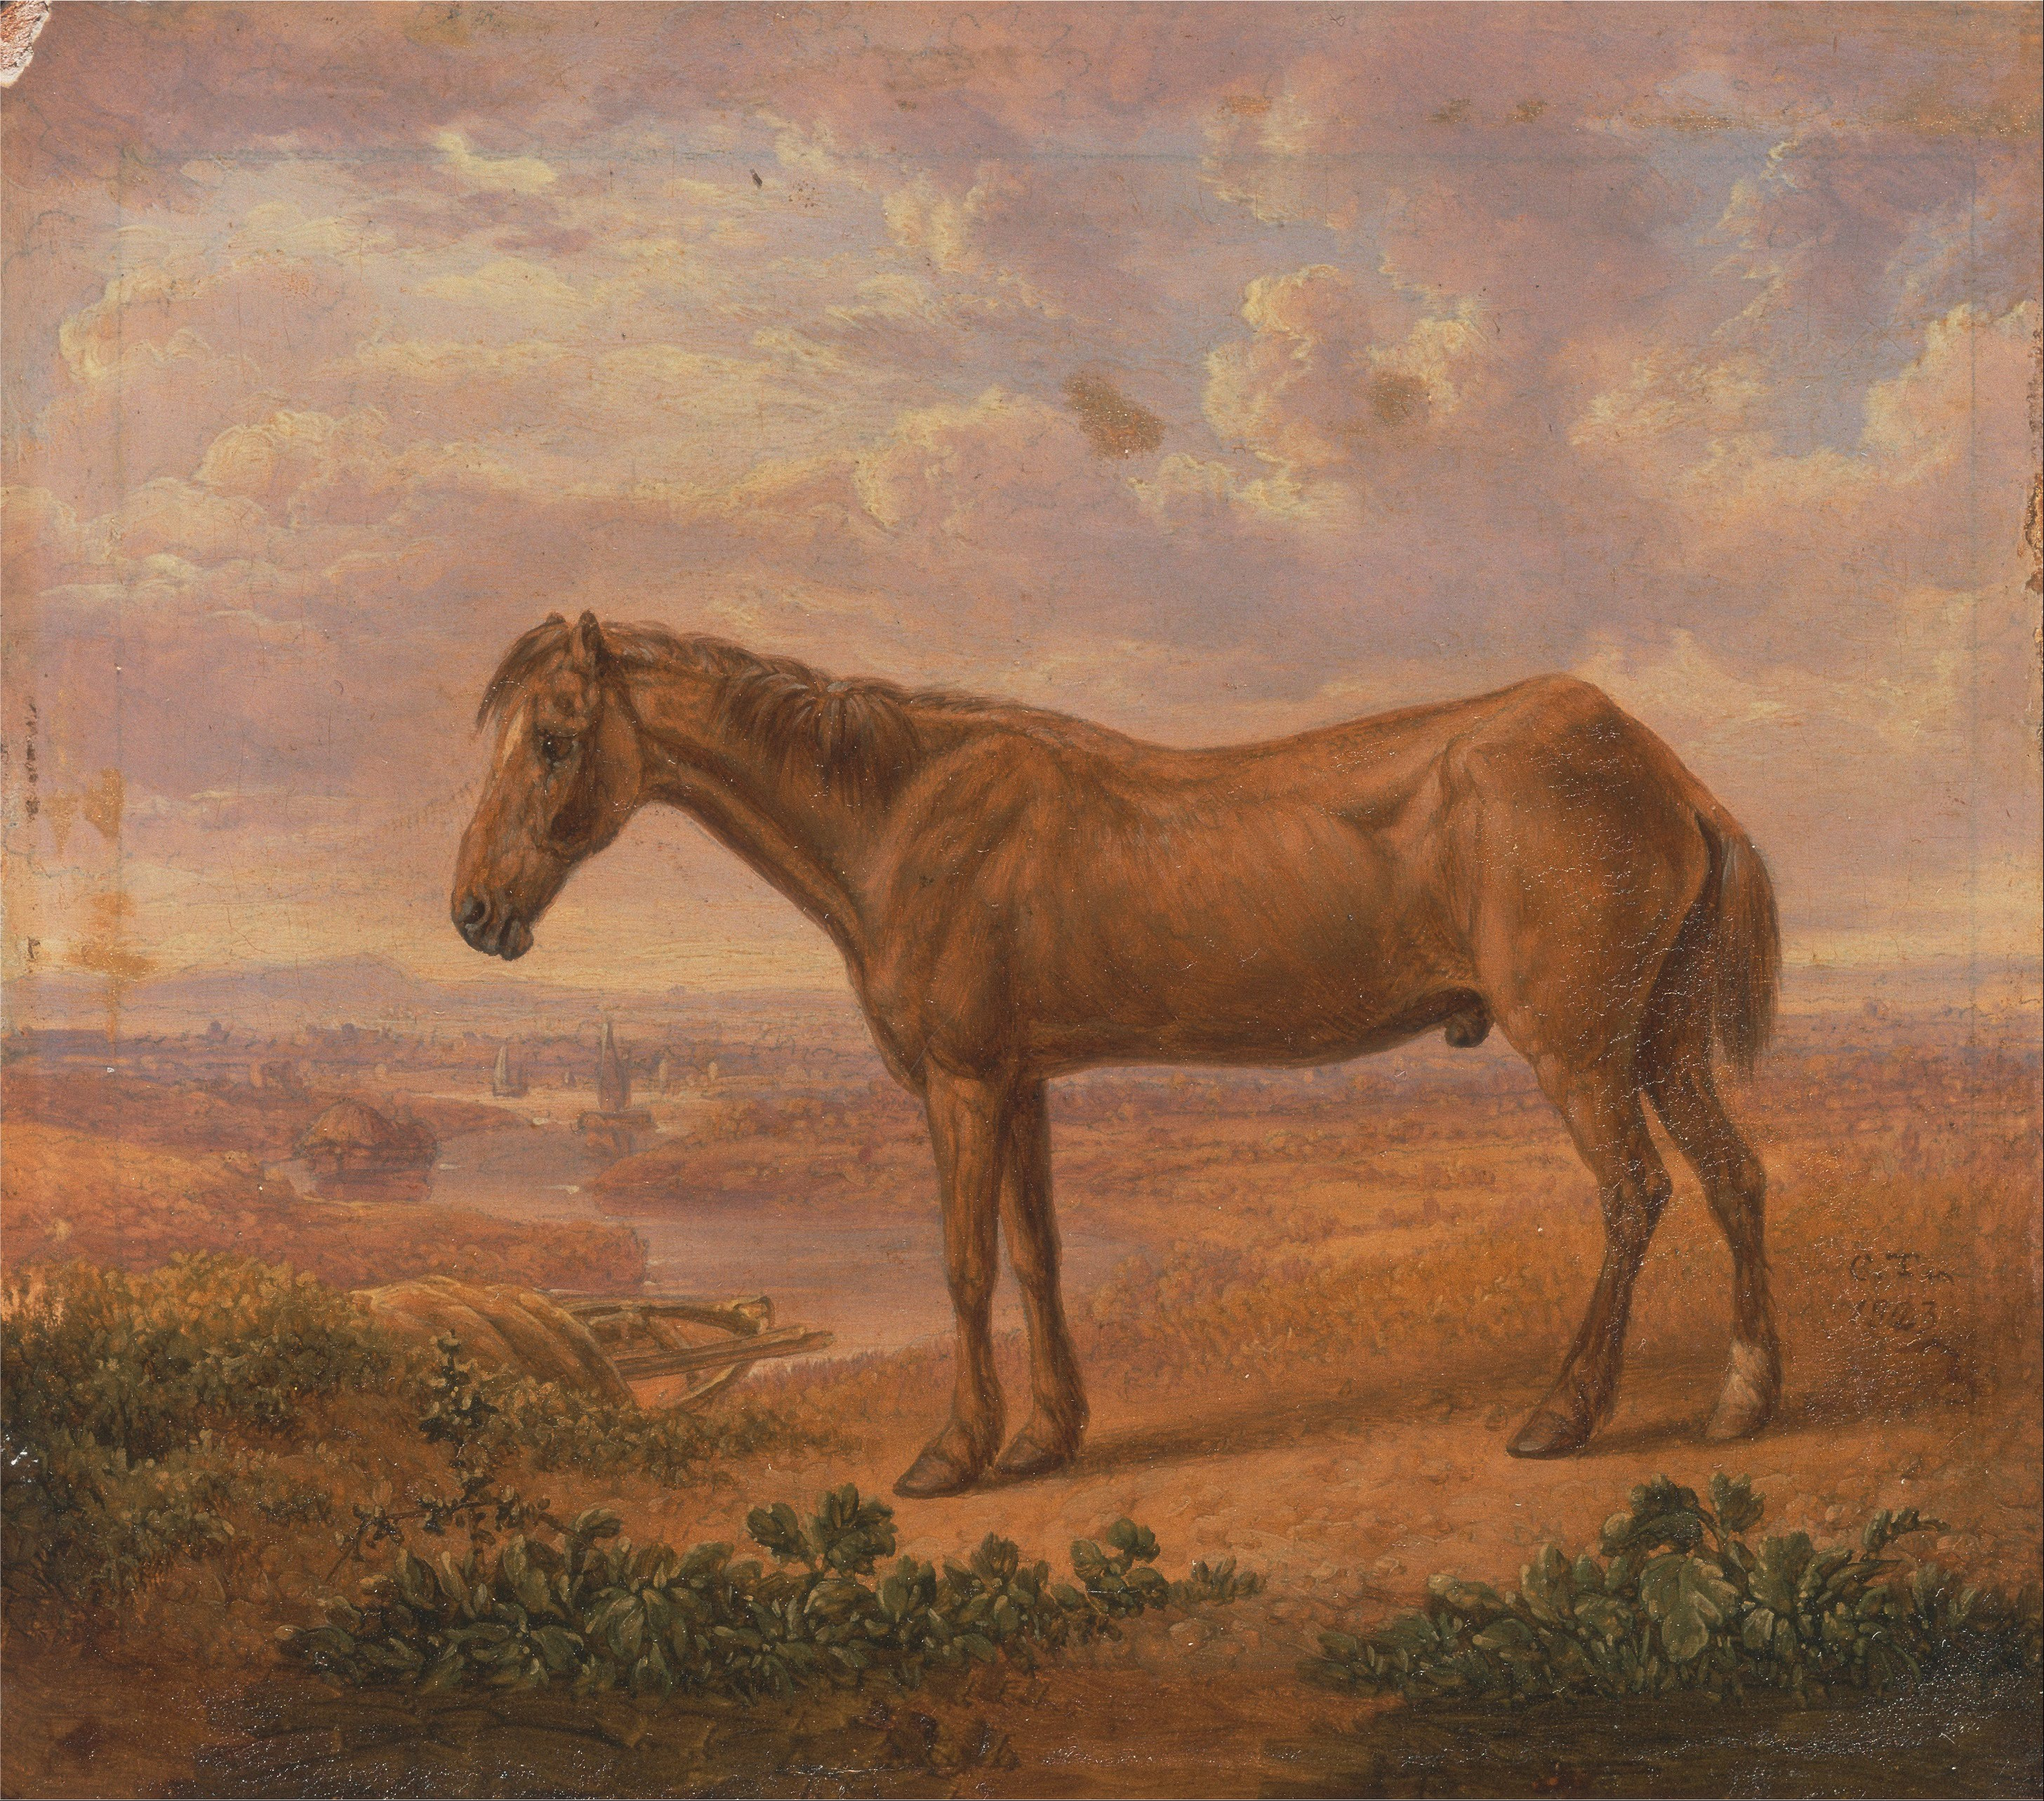 Charles Towne - Old Billy, a Draught Horse, Aged 62 - Google Art Project